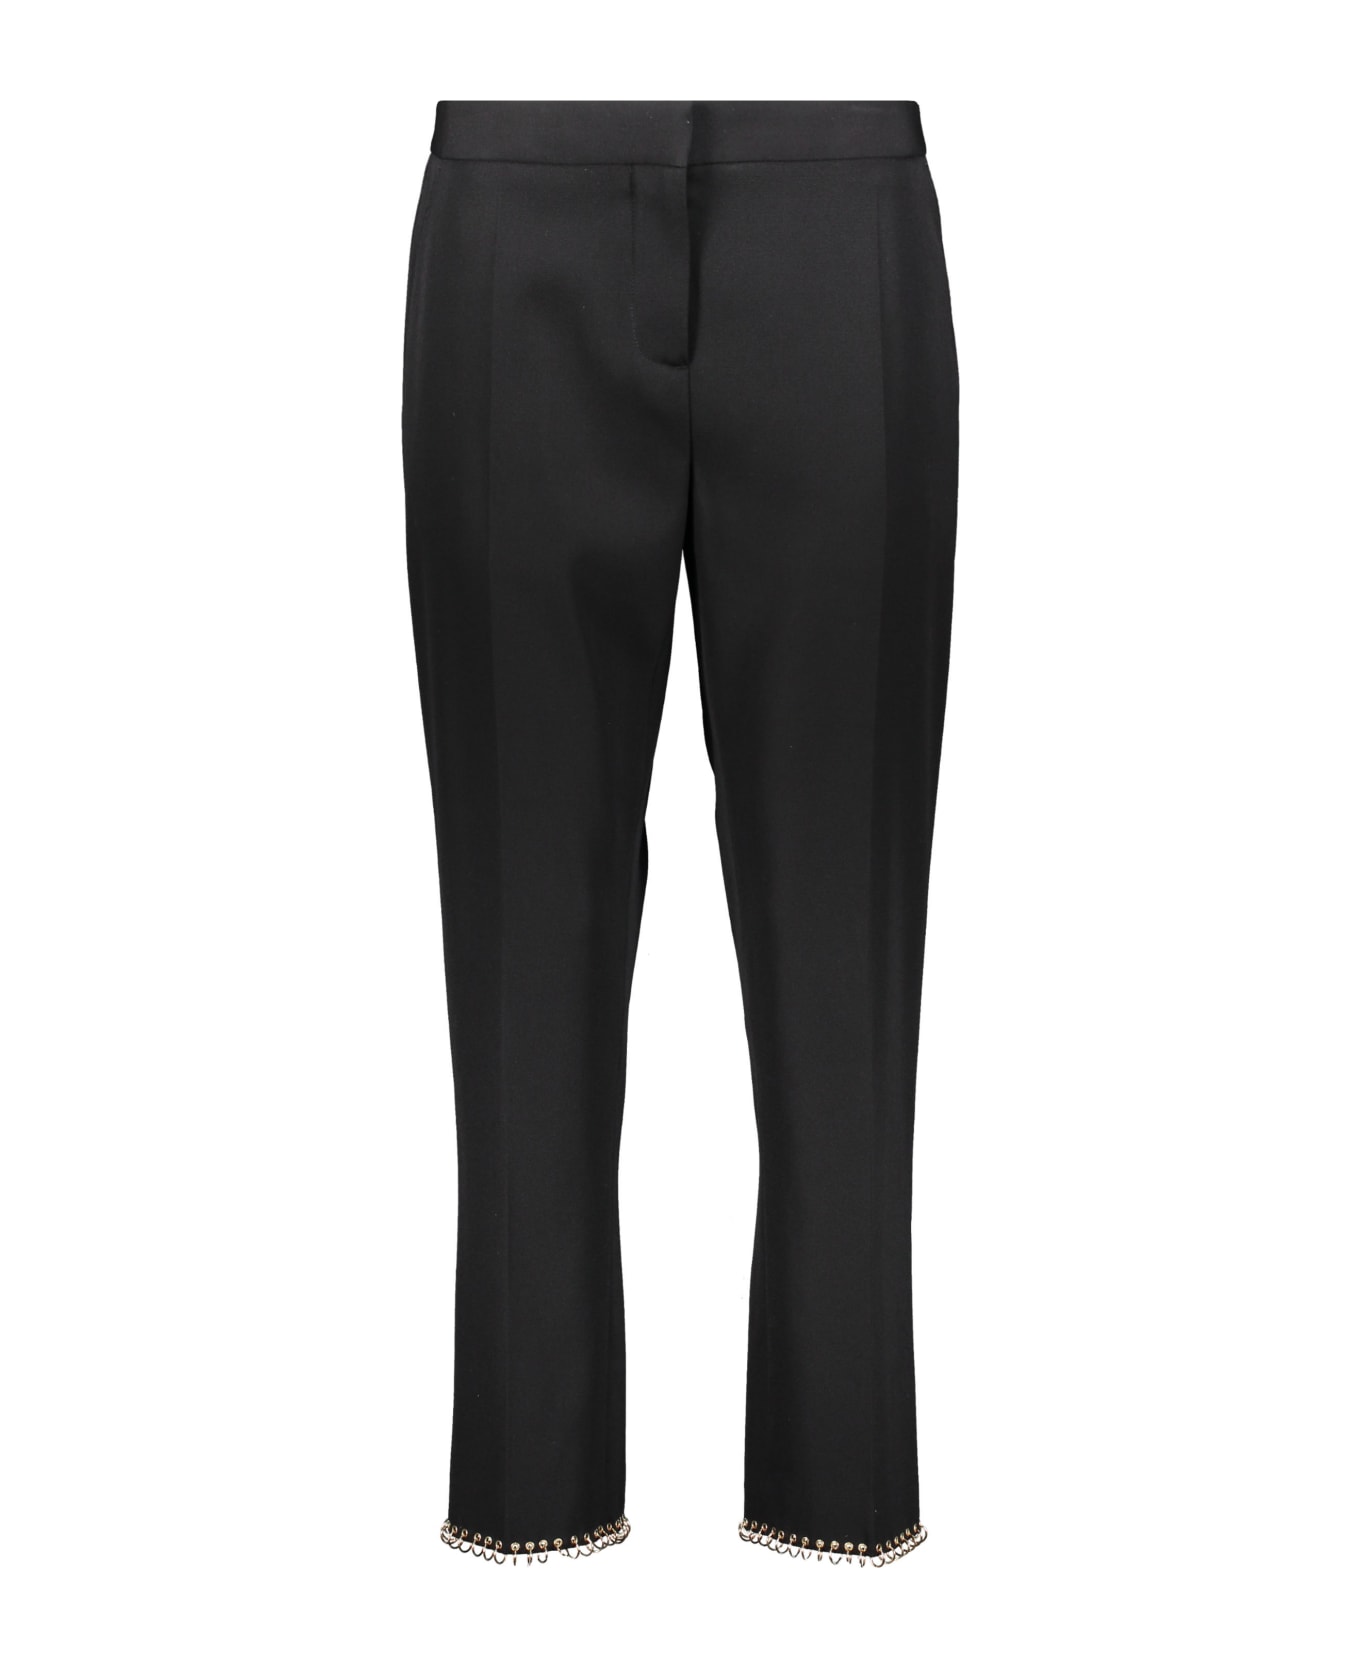 Burberry Wool Trousers - black ボトムス